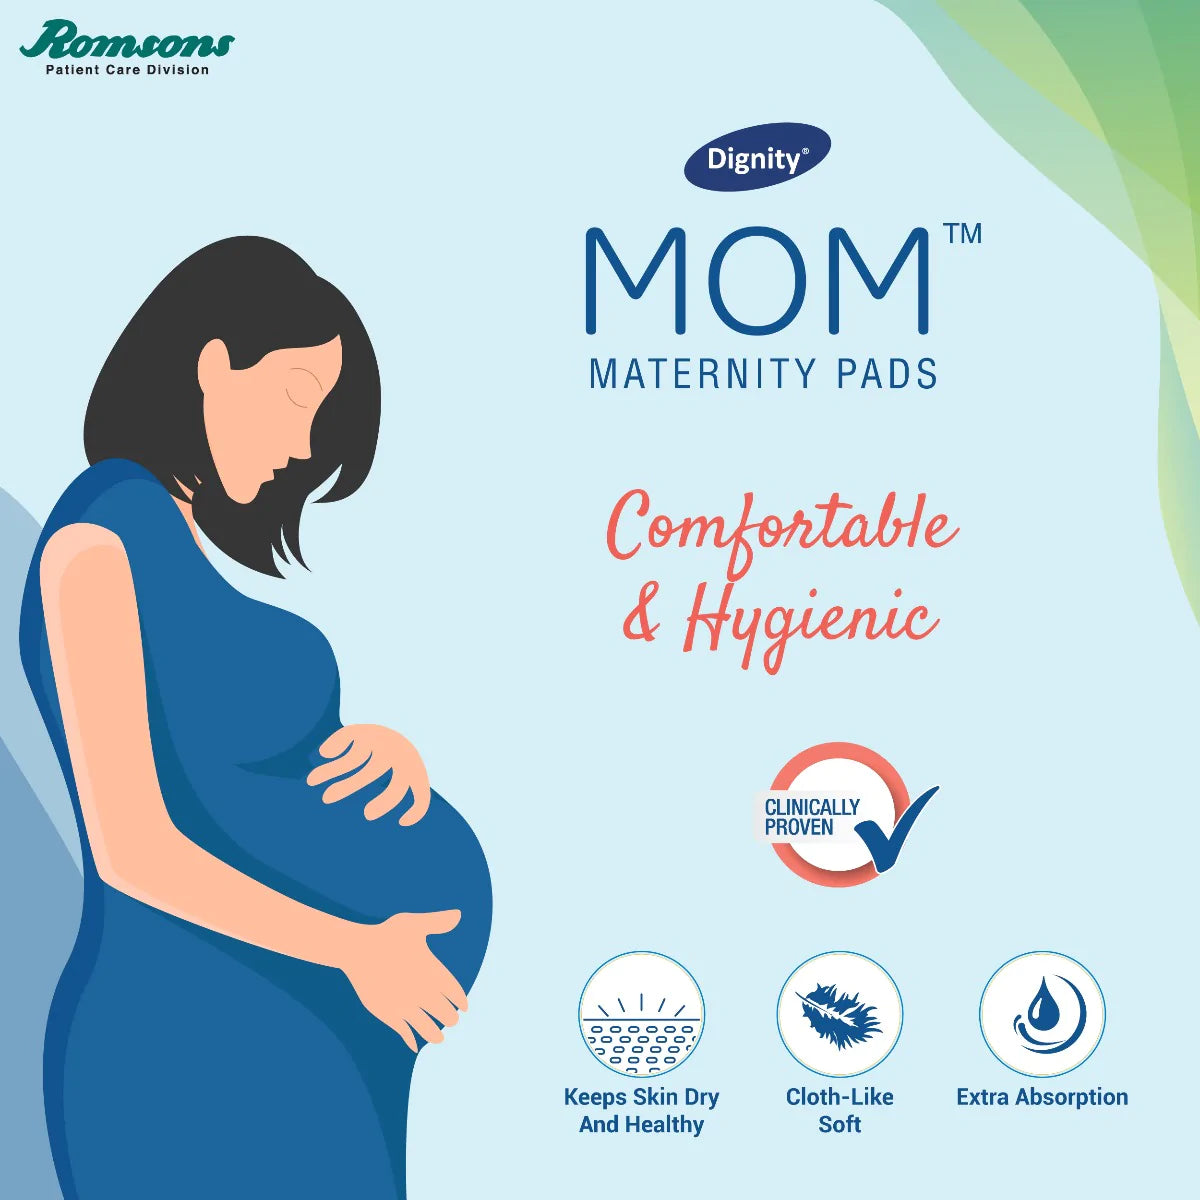 Dignity Mom Maternity Pads (5 Pcs/Pack)